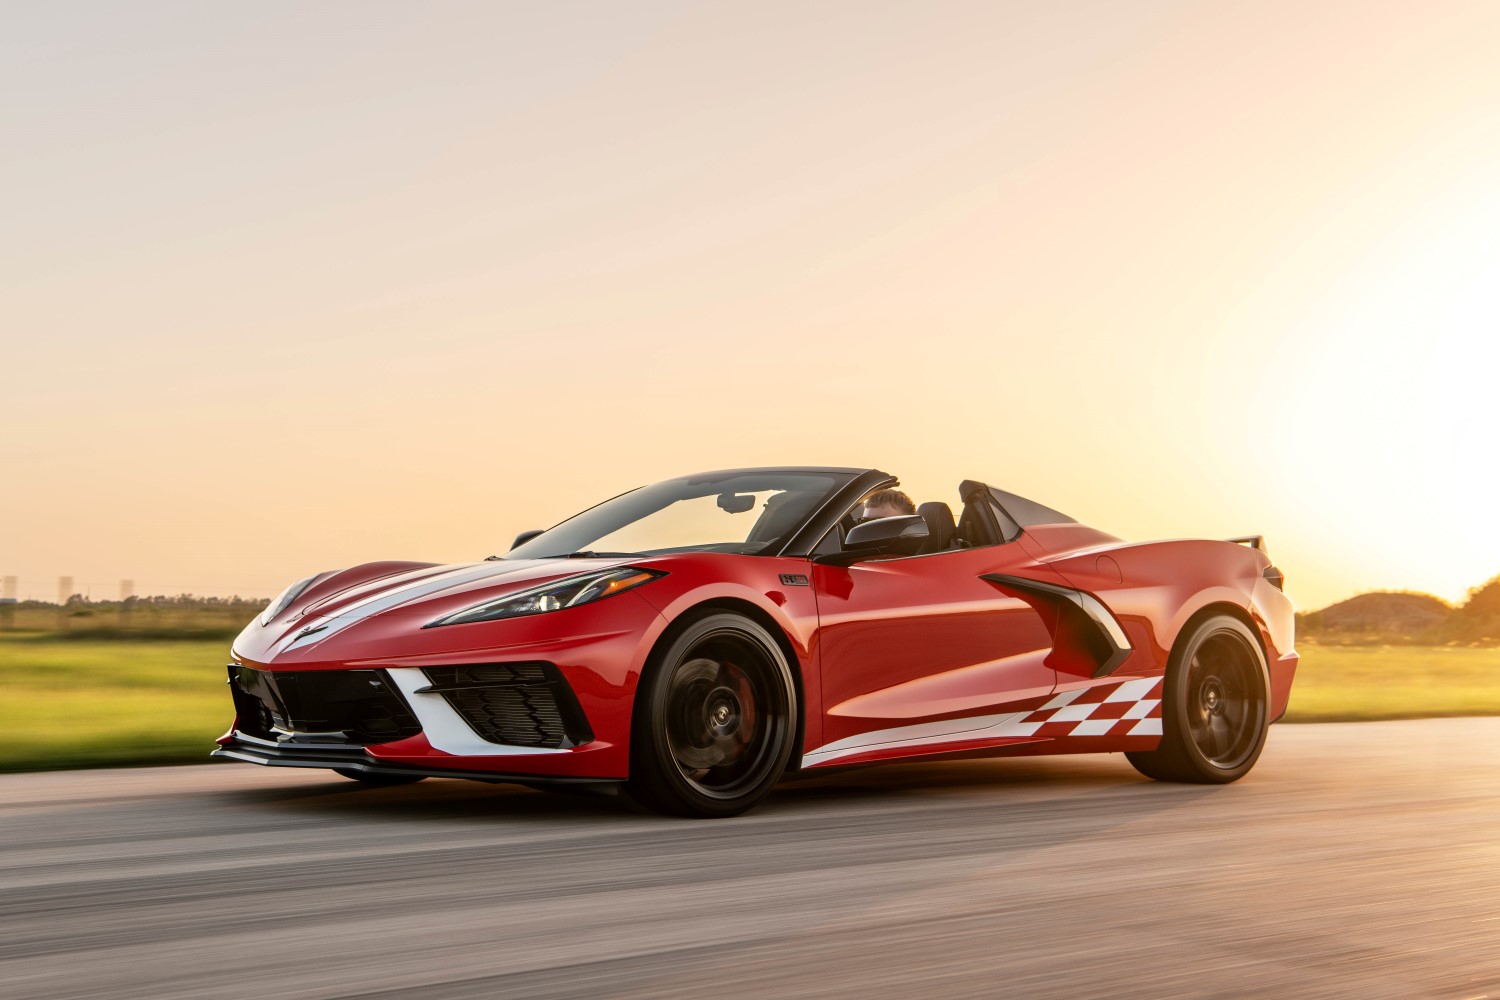 Hennessey’s Supercharged Midship Vette – H700 C8 Convertible